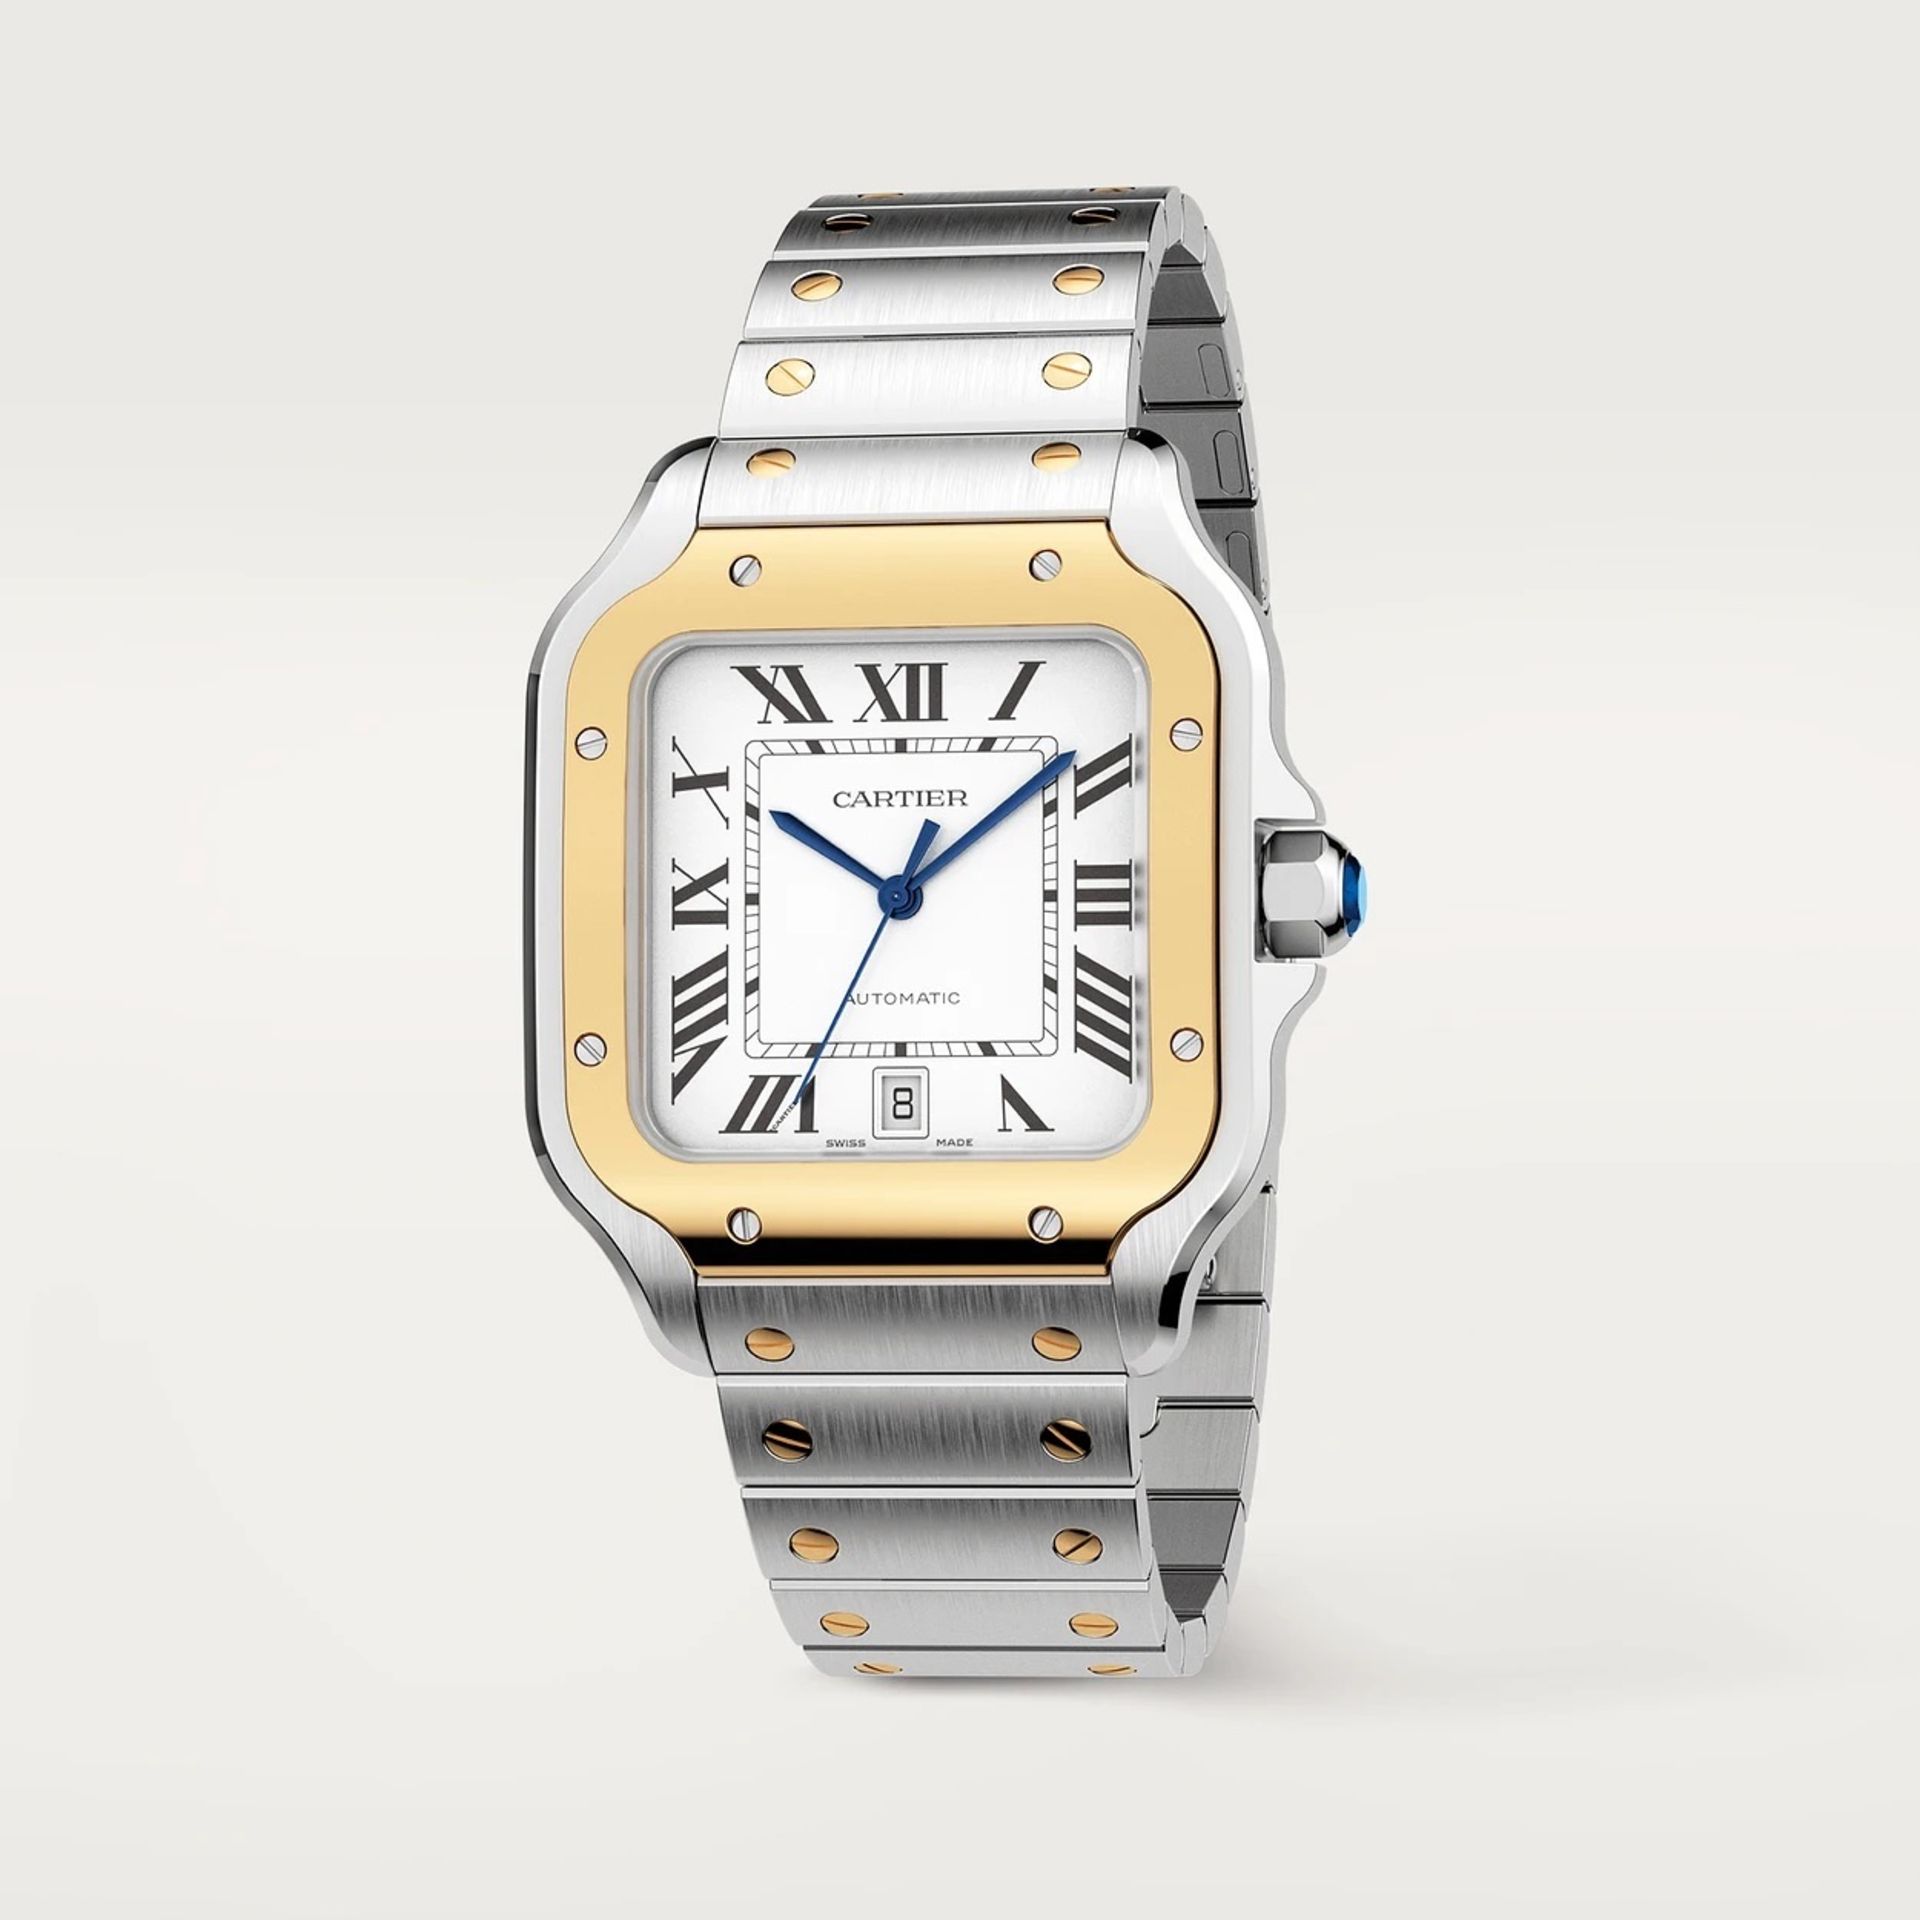 Cartier Santos De Cartier Large Model - Automatic Movement - Yellow Gold Stainless Steel White Dial - Image 2 of 12